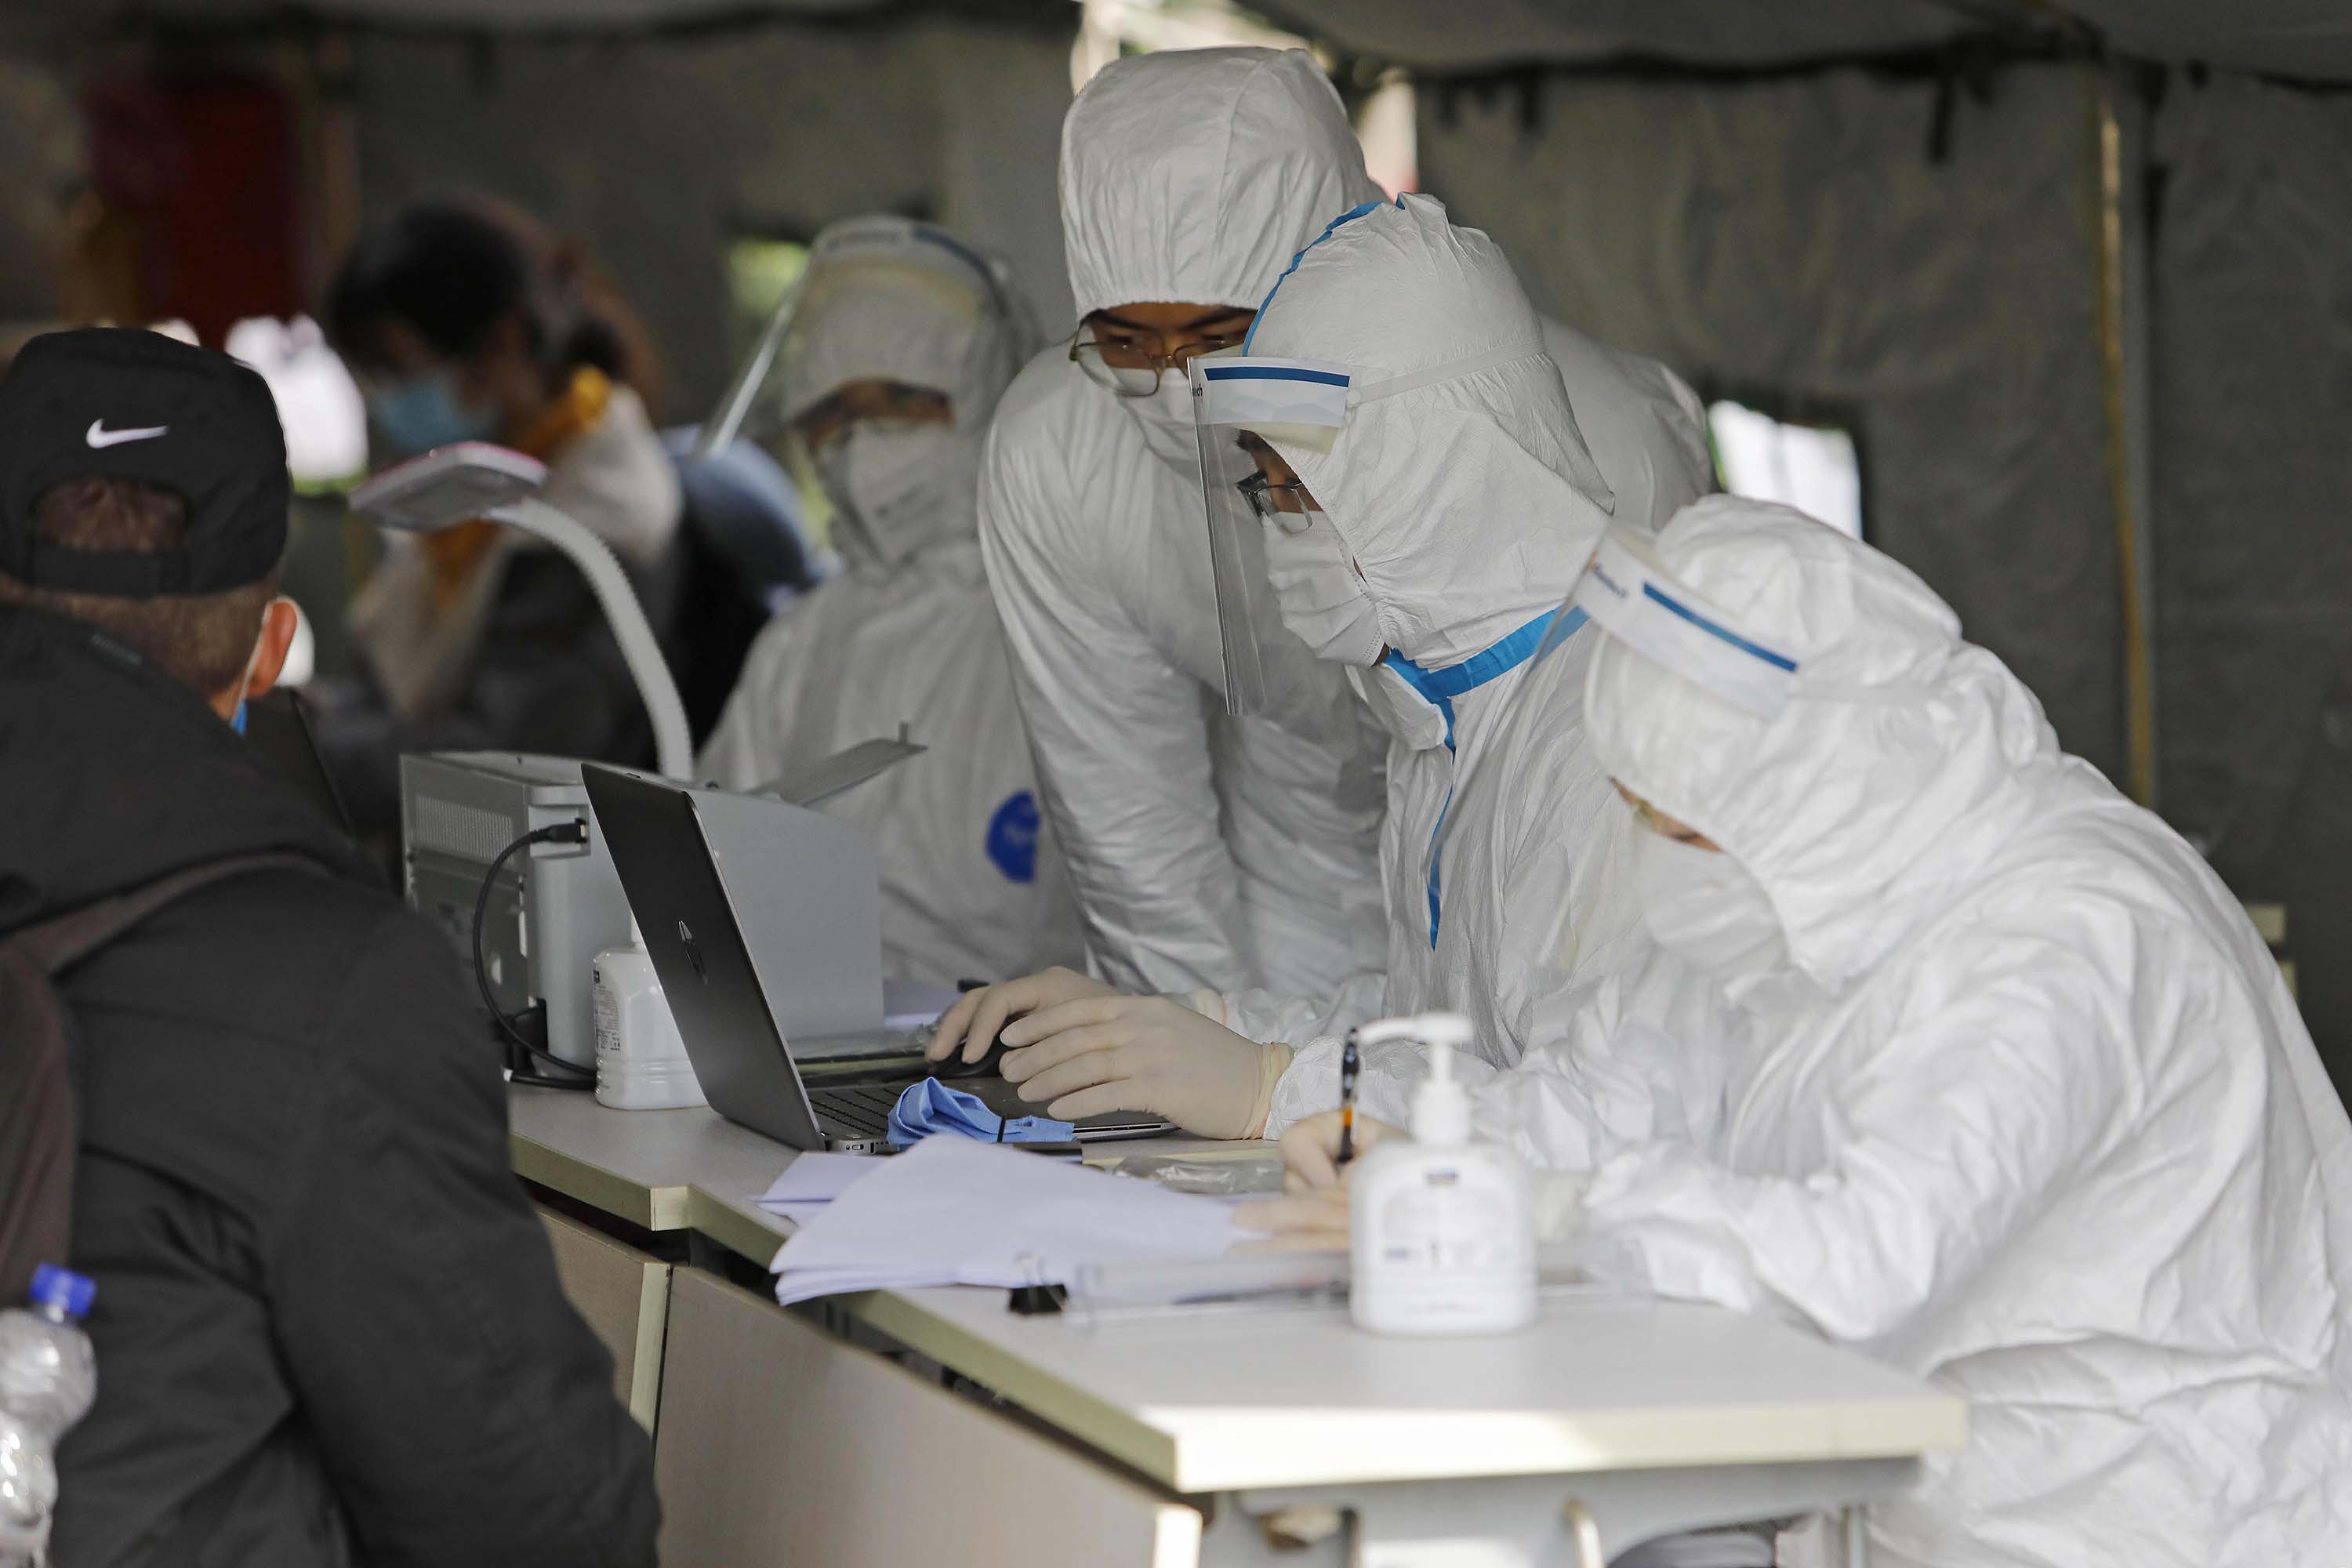 Workers record information on inbound passengers at a coronavirus screening checkpoint in Shanghai, China, on March 19.